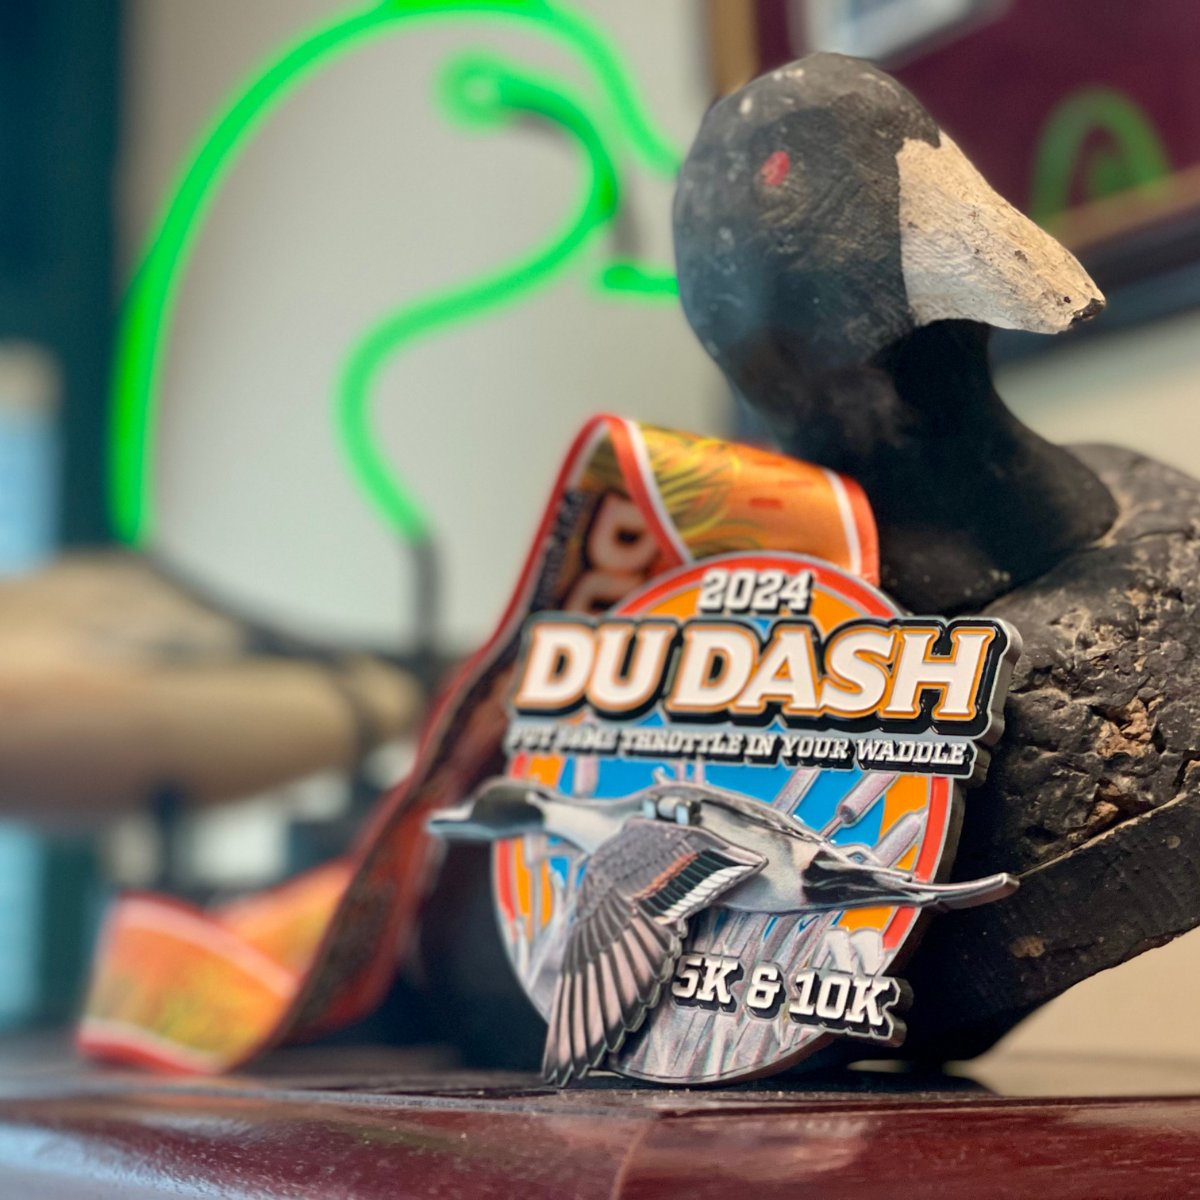 BOOT COOTIN' BOOGIE: ducks.org/dudash | Put some throttle in your waddle for conservation! Register now for the virtual DU Dash! Do the DU Dash on your own time, on your course, between June 8th and June 16th. You can support the cause by participating in the 5k or 10k…